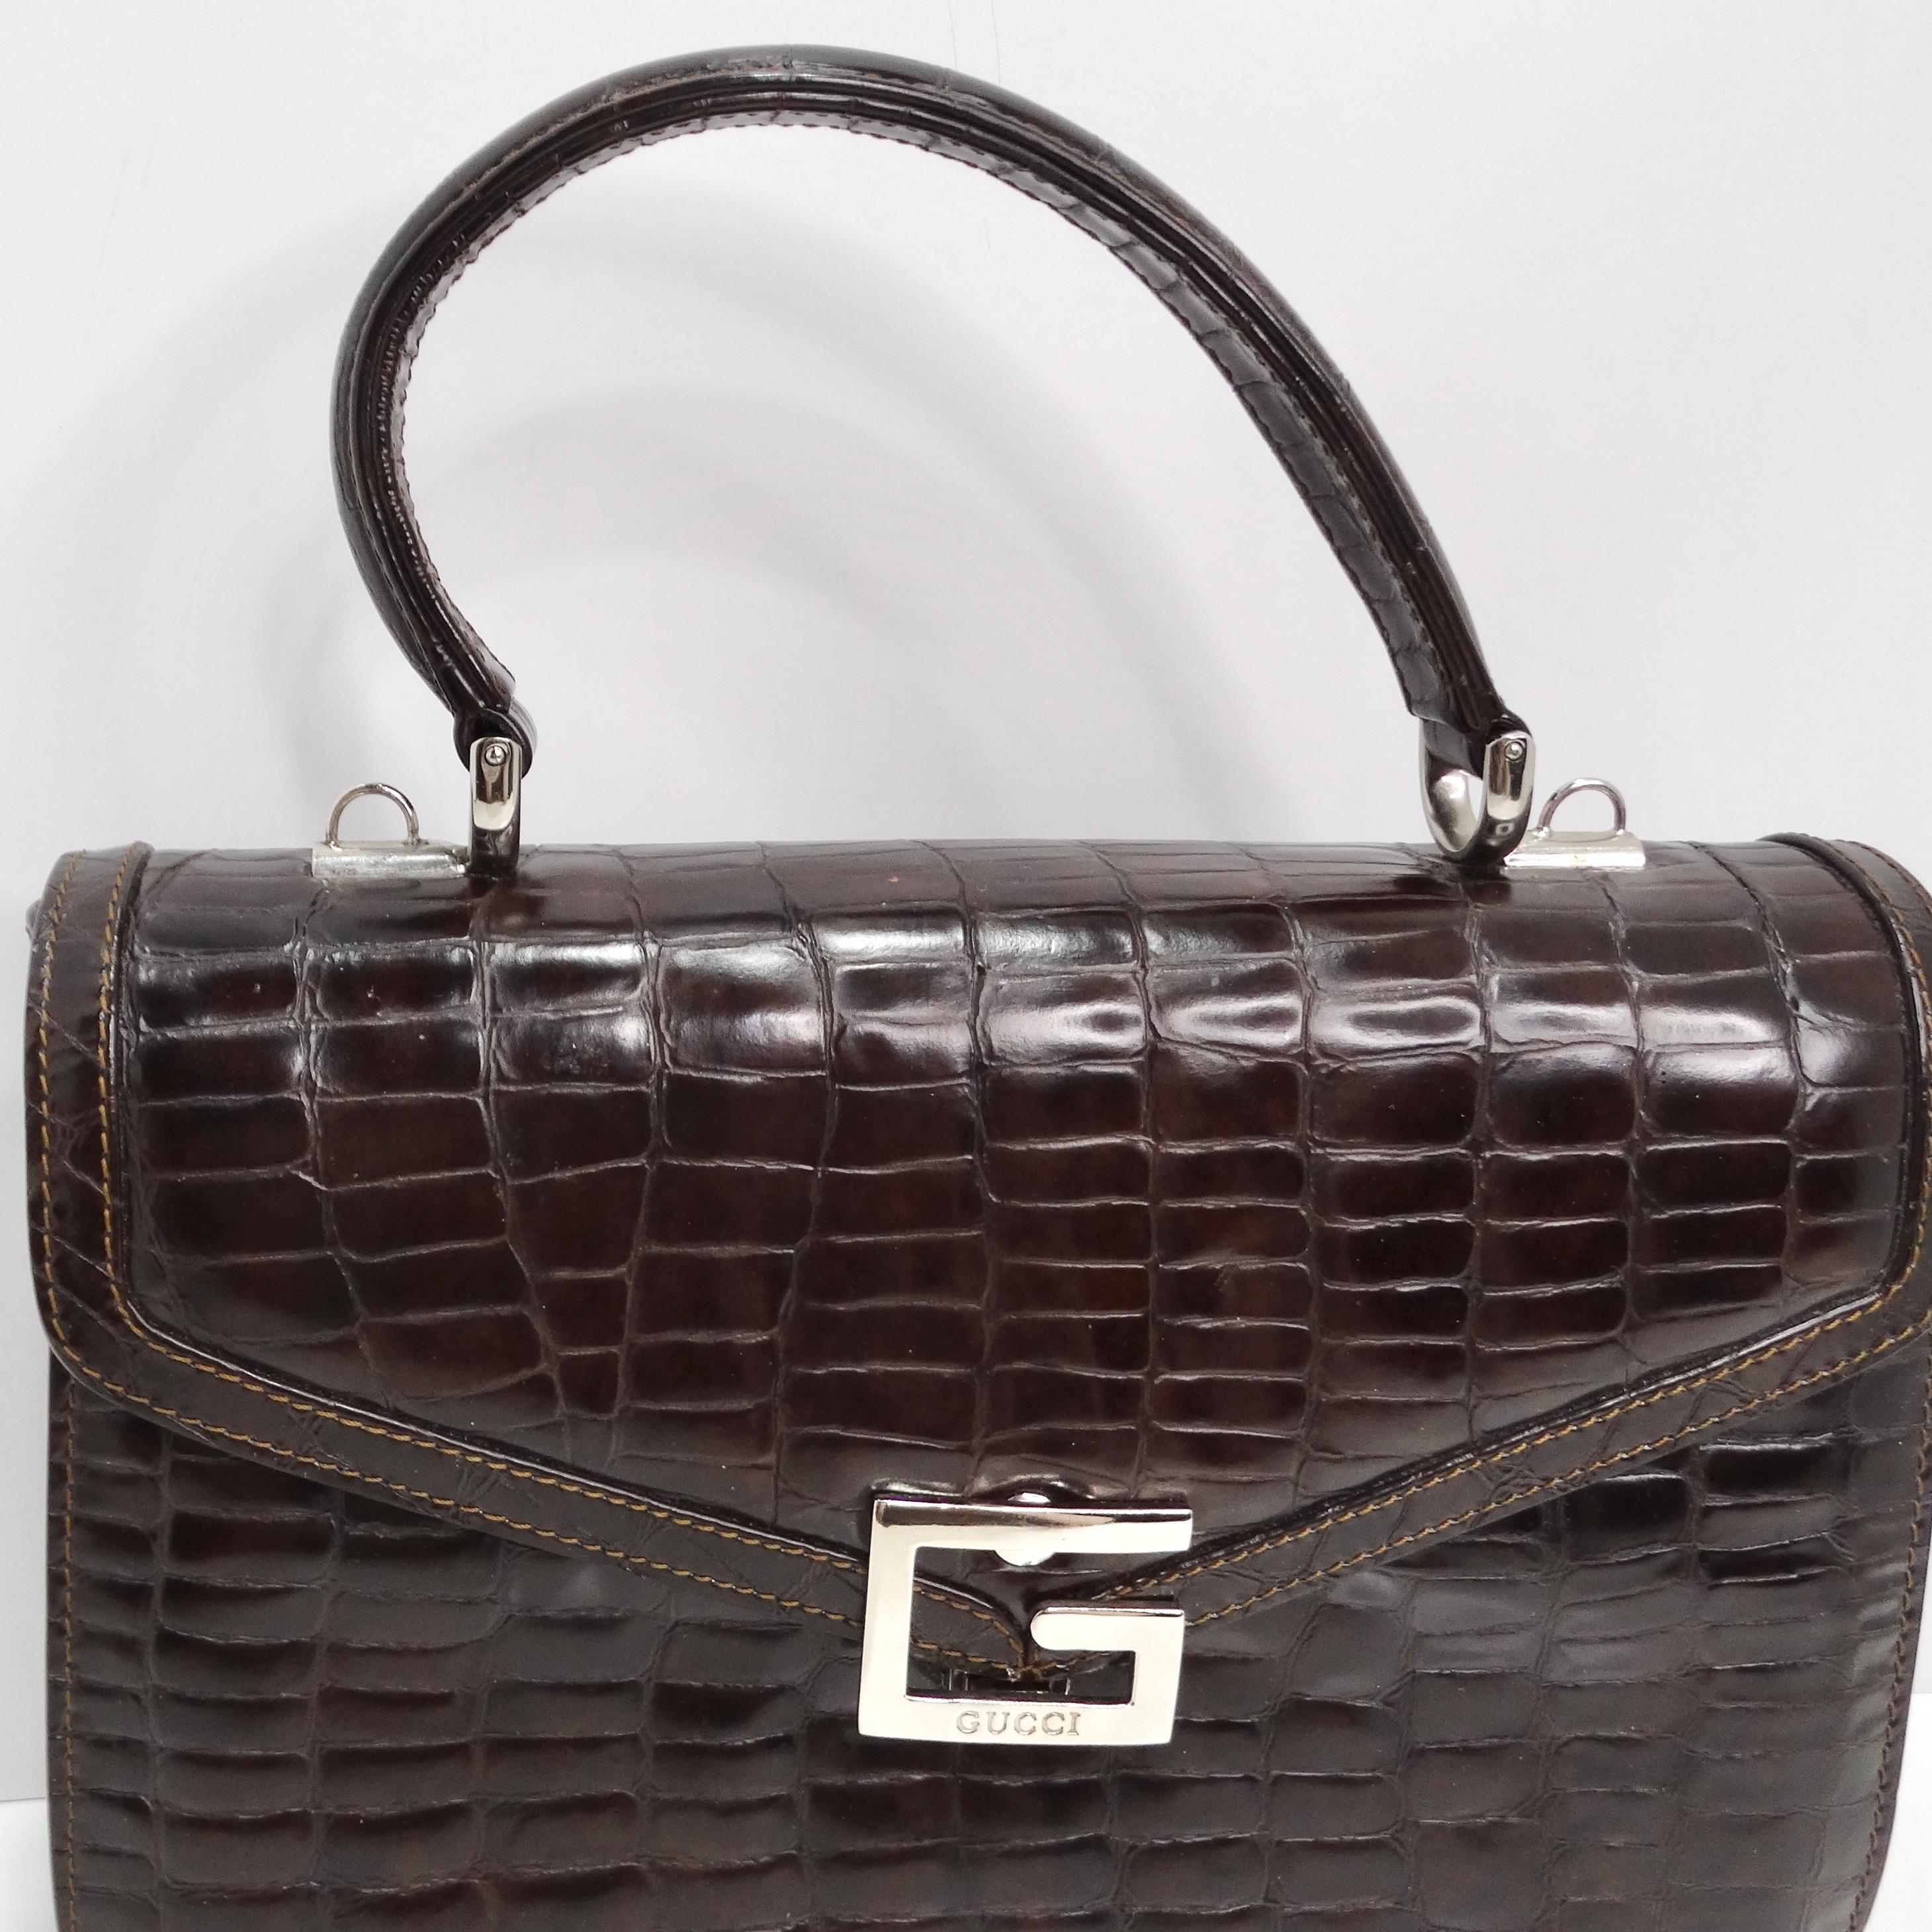 Gucci 1980s Alligator Embossed Leather Handbag In Good Condition For Sale In Scottsdale, AZ